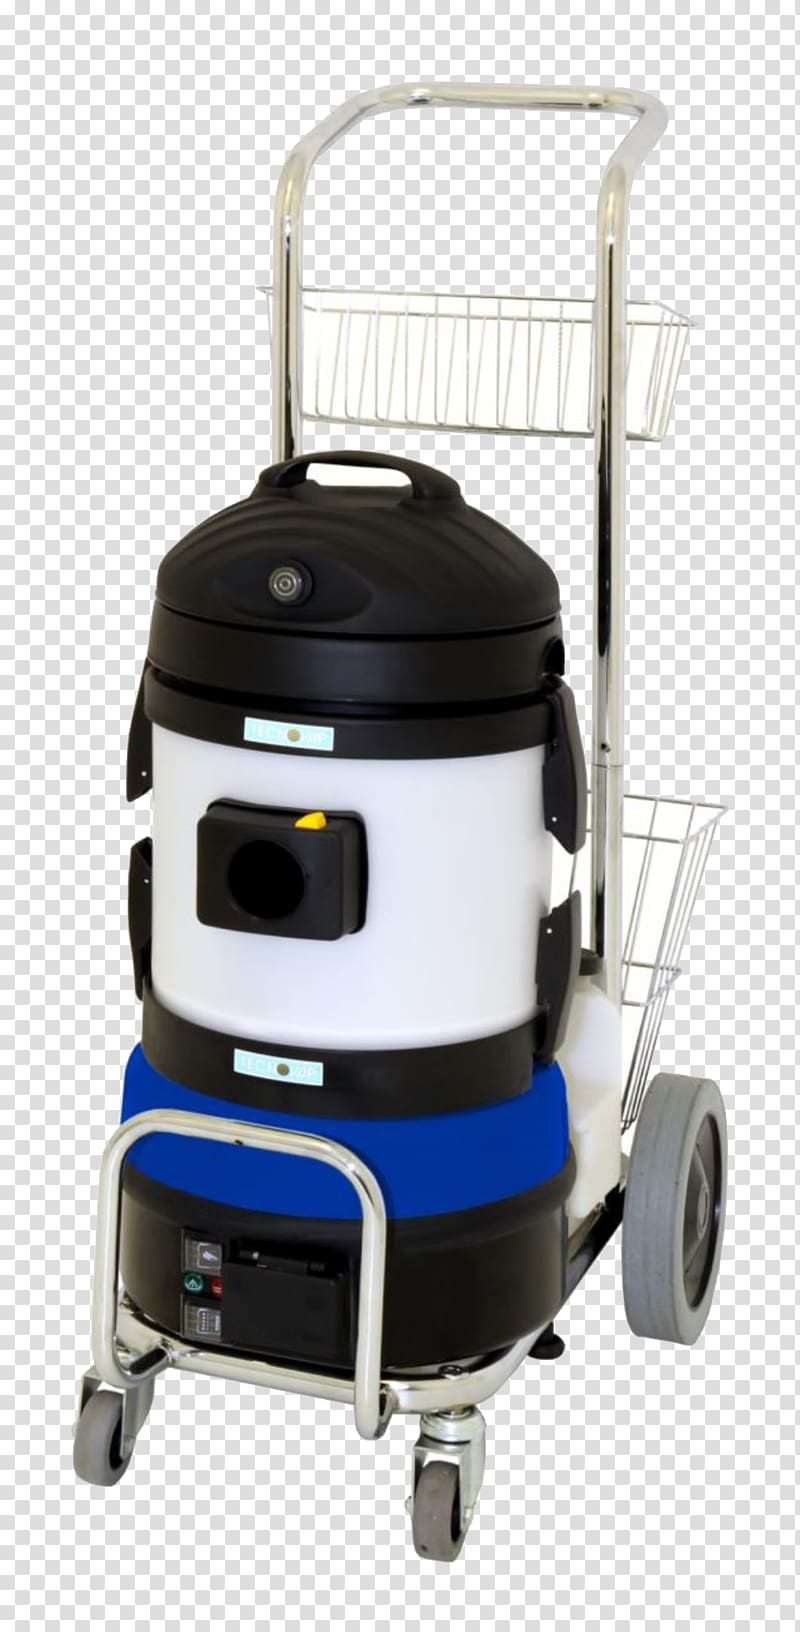 Vacuum cleaner Vapor steam cleaner Steam cleaning, others transparent background PNG clipart